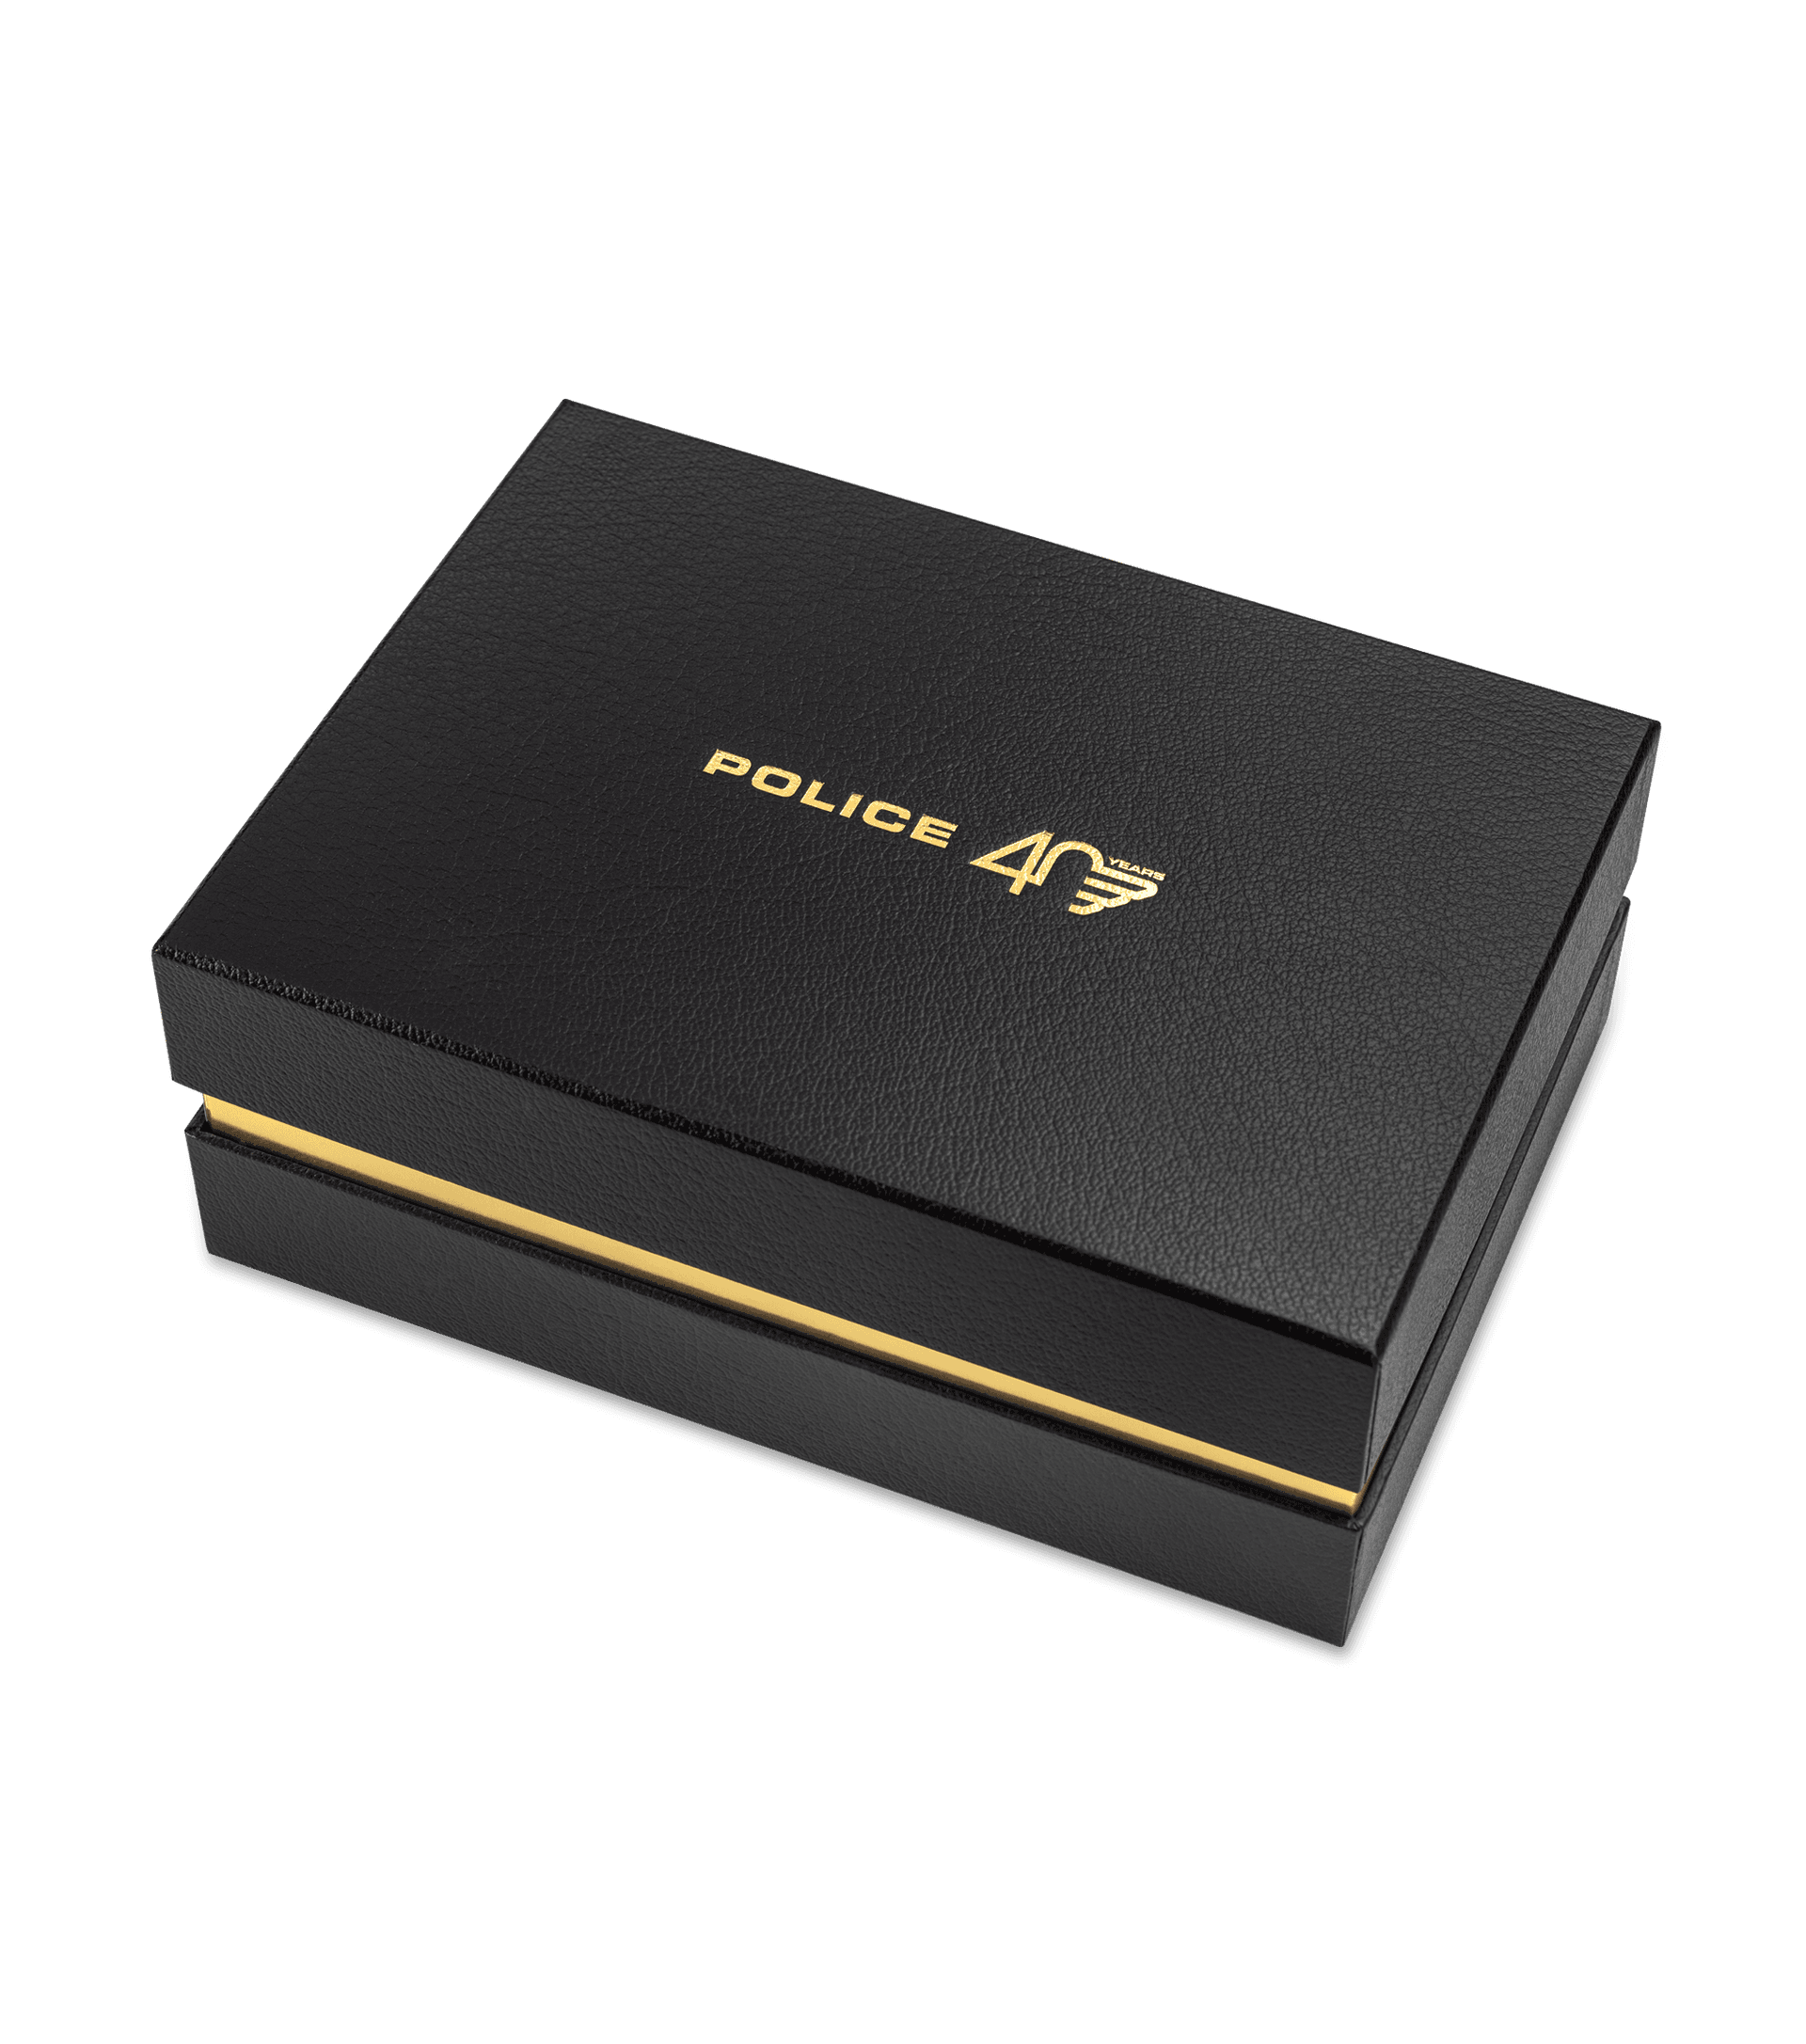 Police watches - The Anniversary Collection Watch And Wallet Gift 